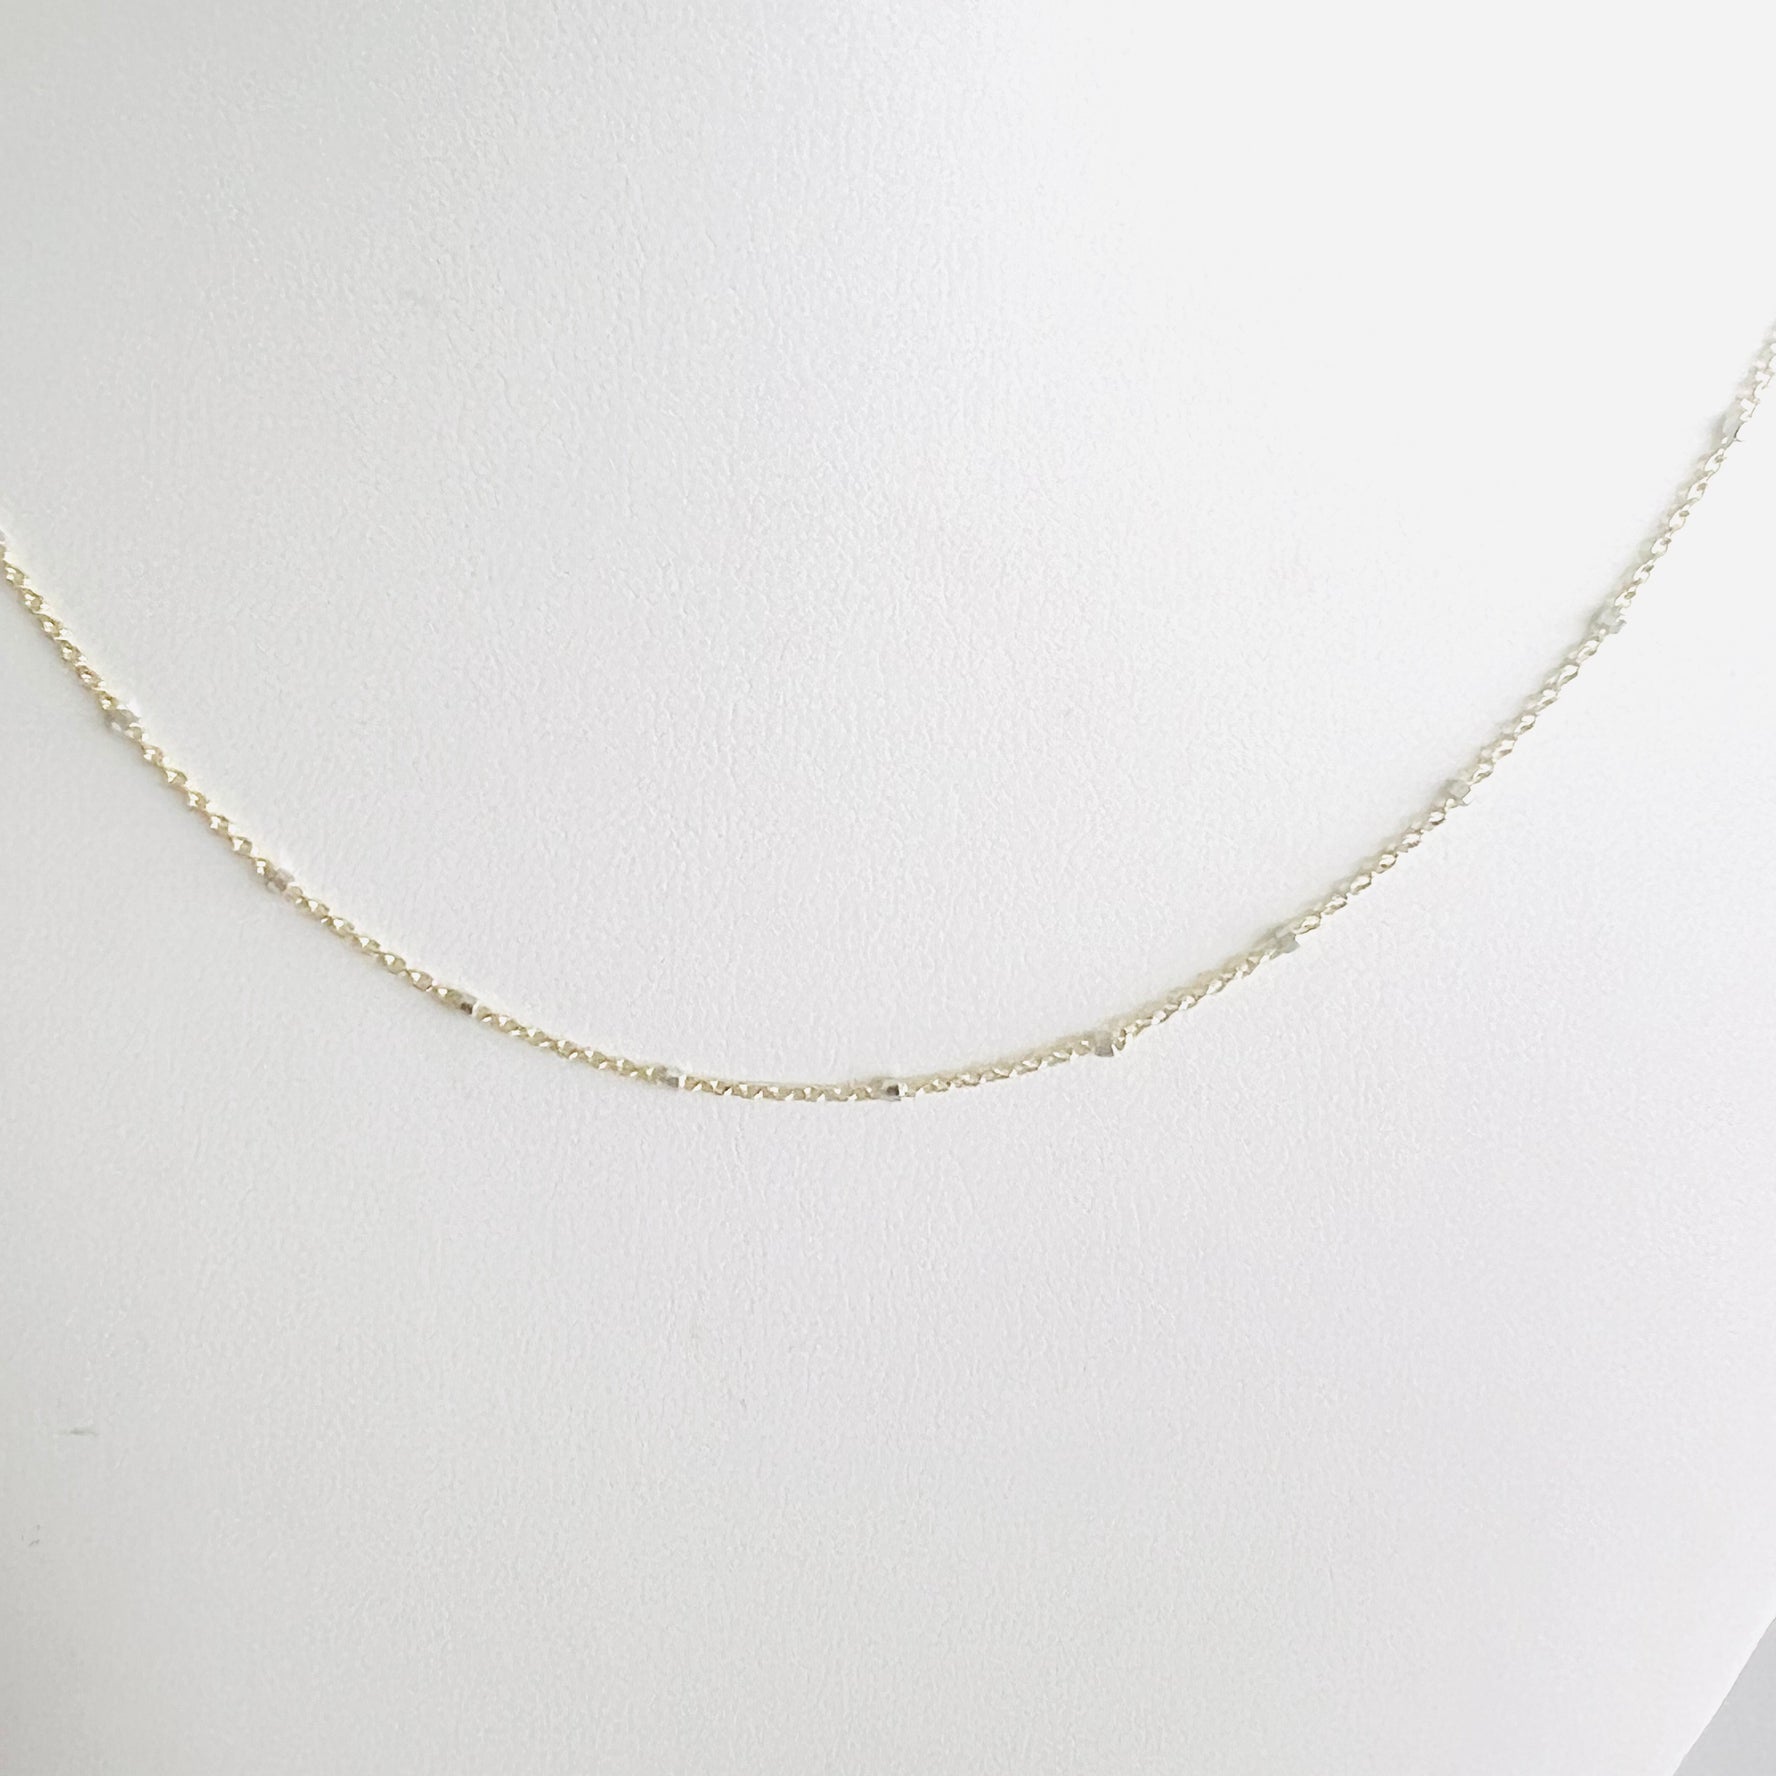 14k gold chain with tiny balls